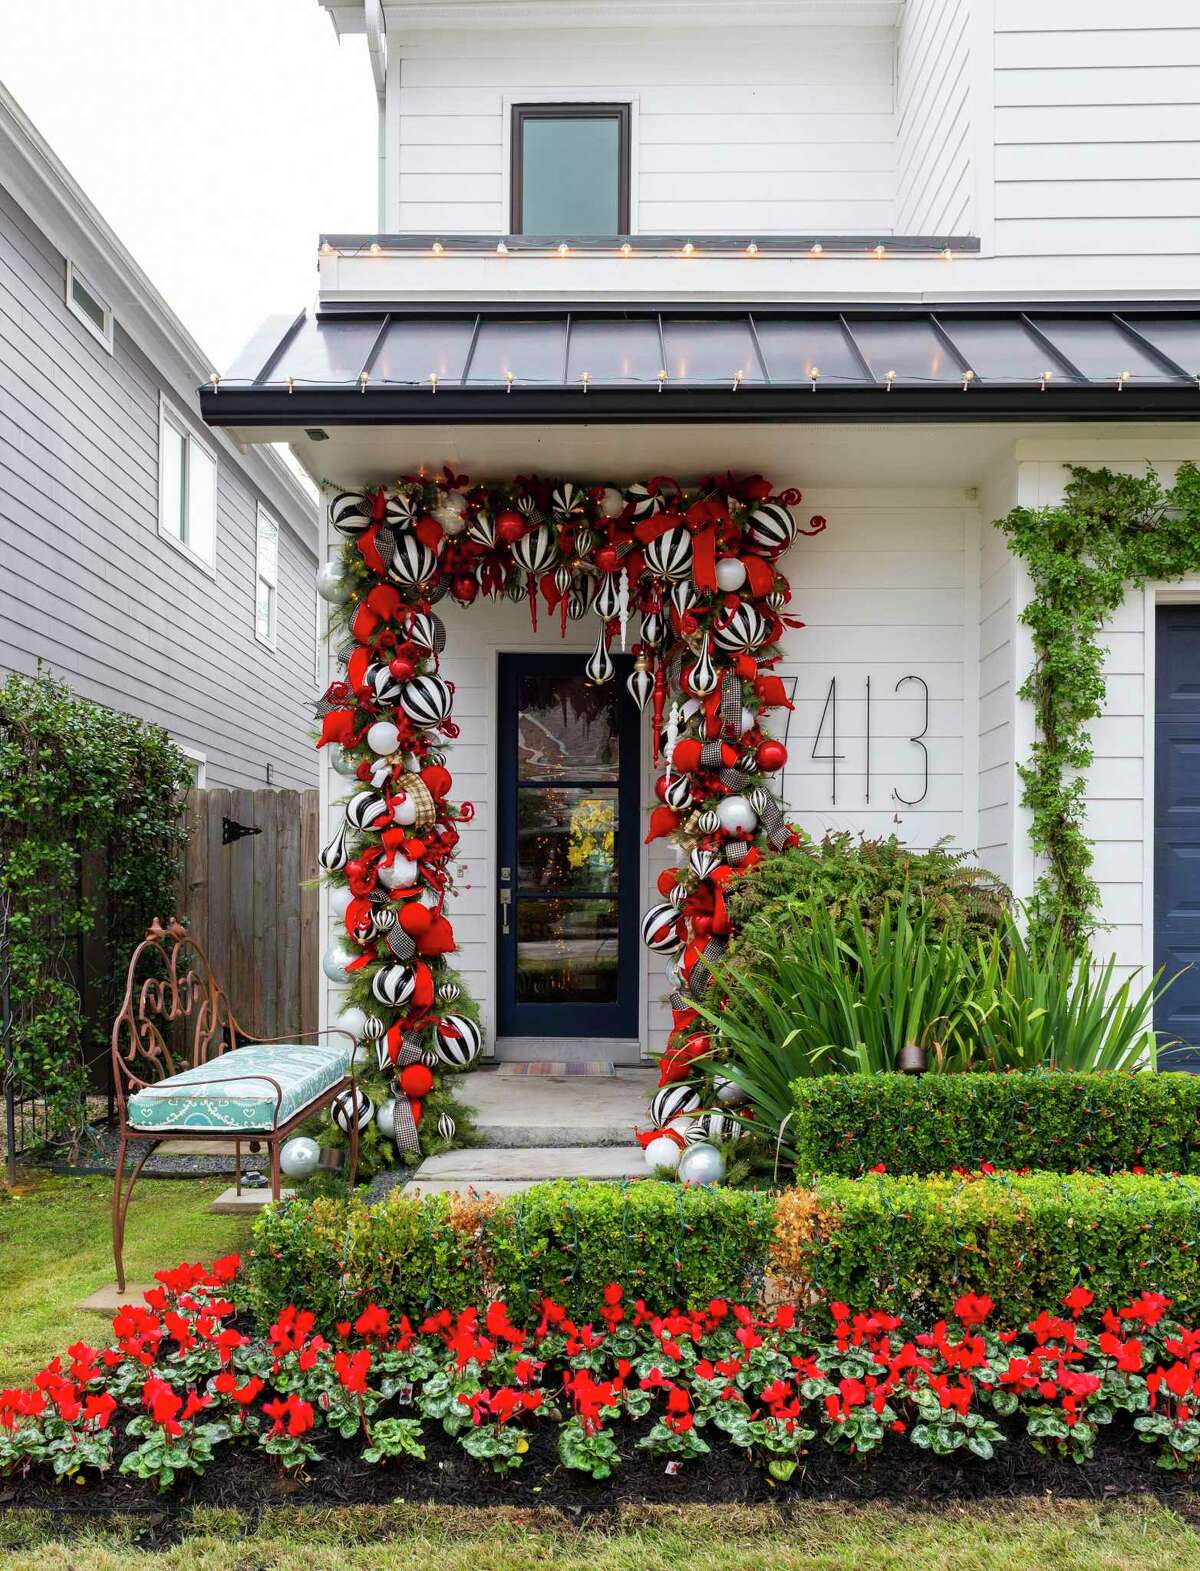 More than 300 bulbs in red or black and white hang on garland around the front door. Red cyclamen in the yard offer complementary holiday color.